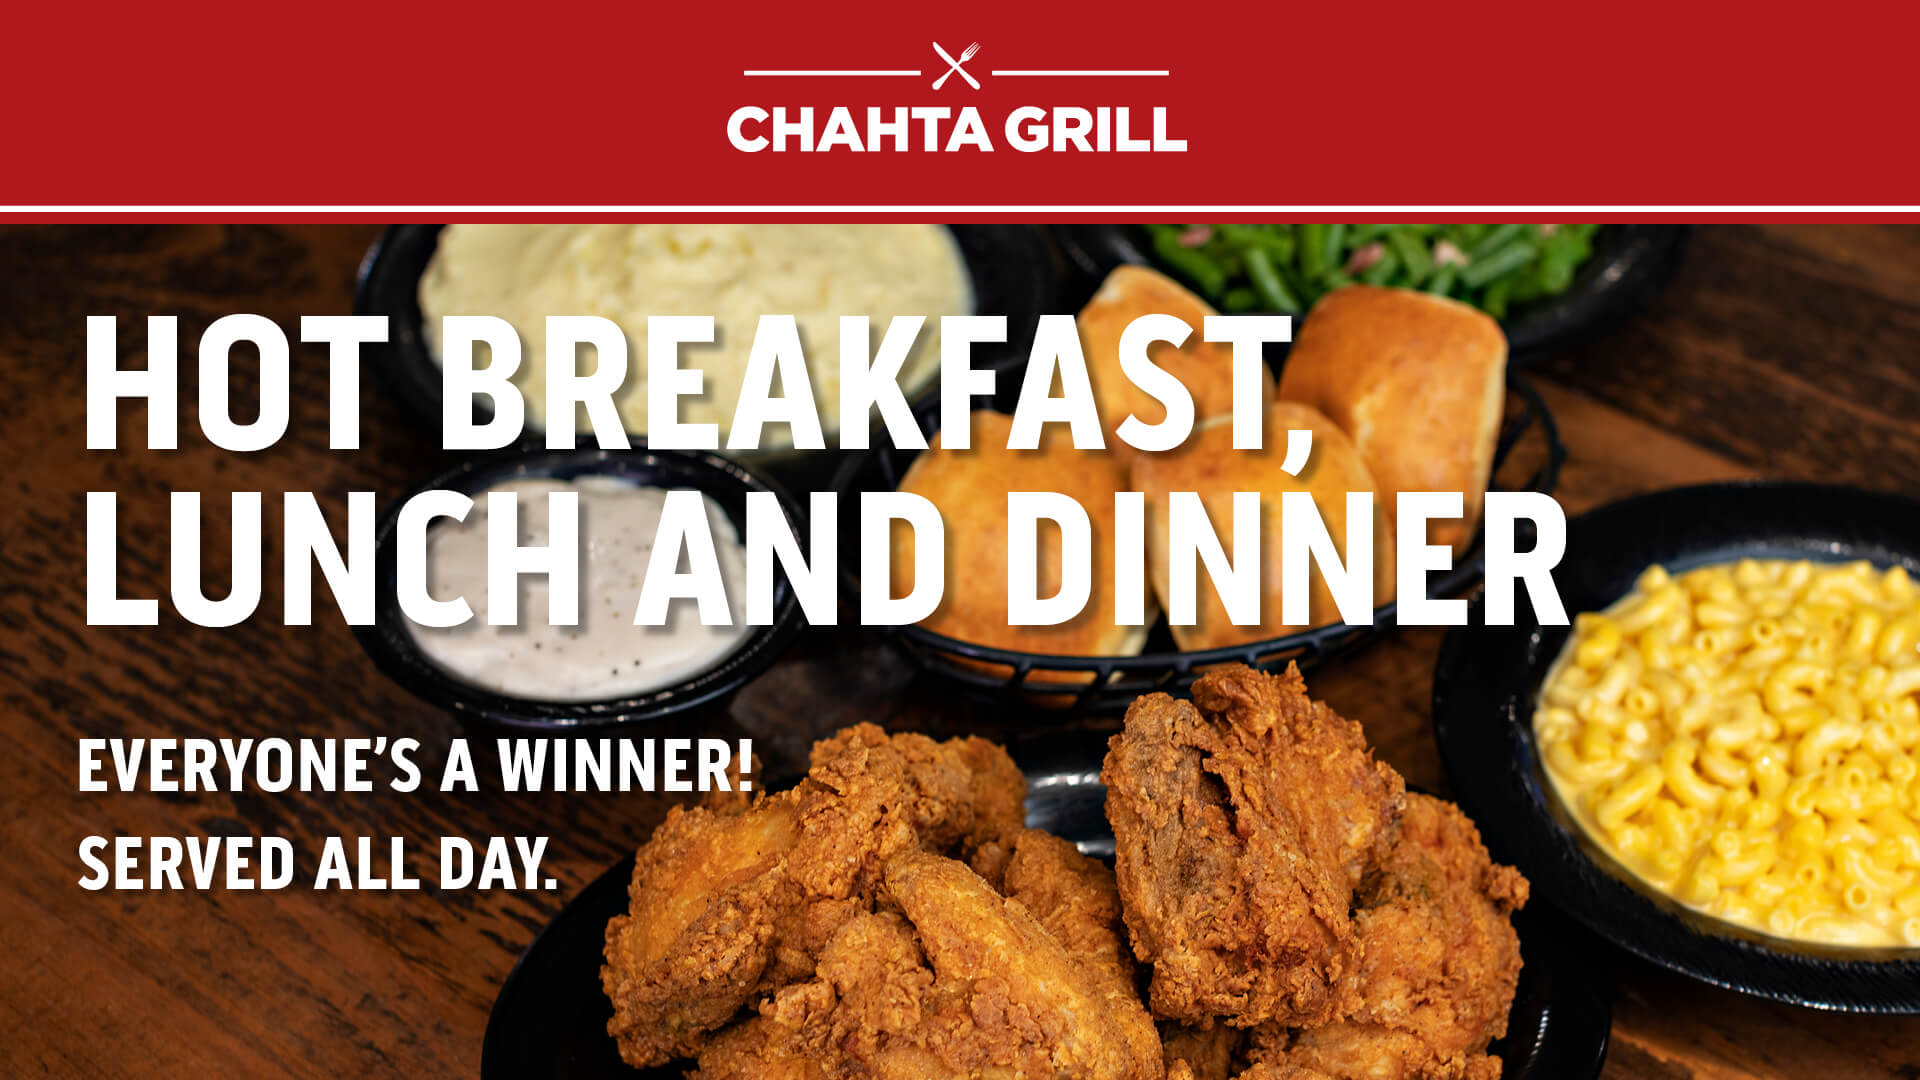 Eat at Chahta Grill.